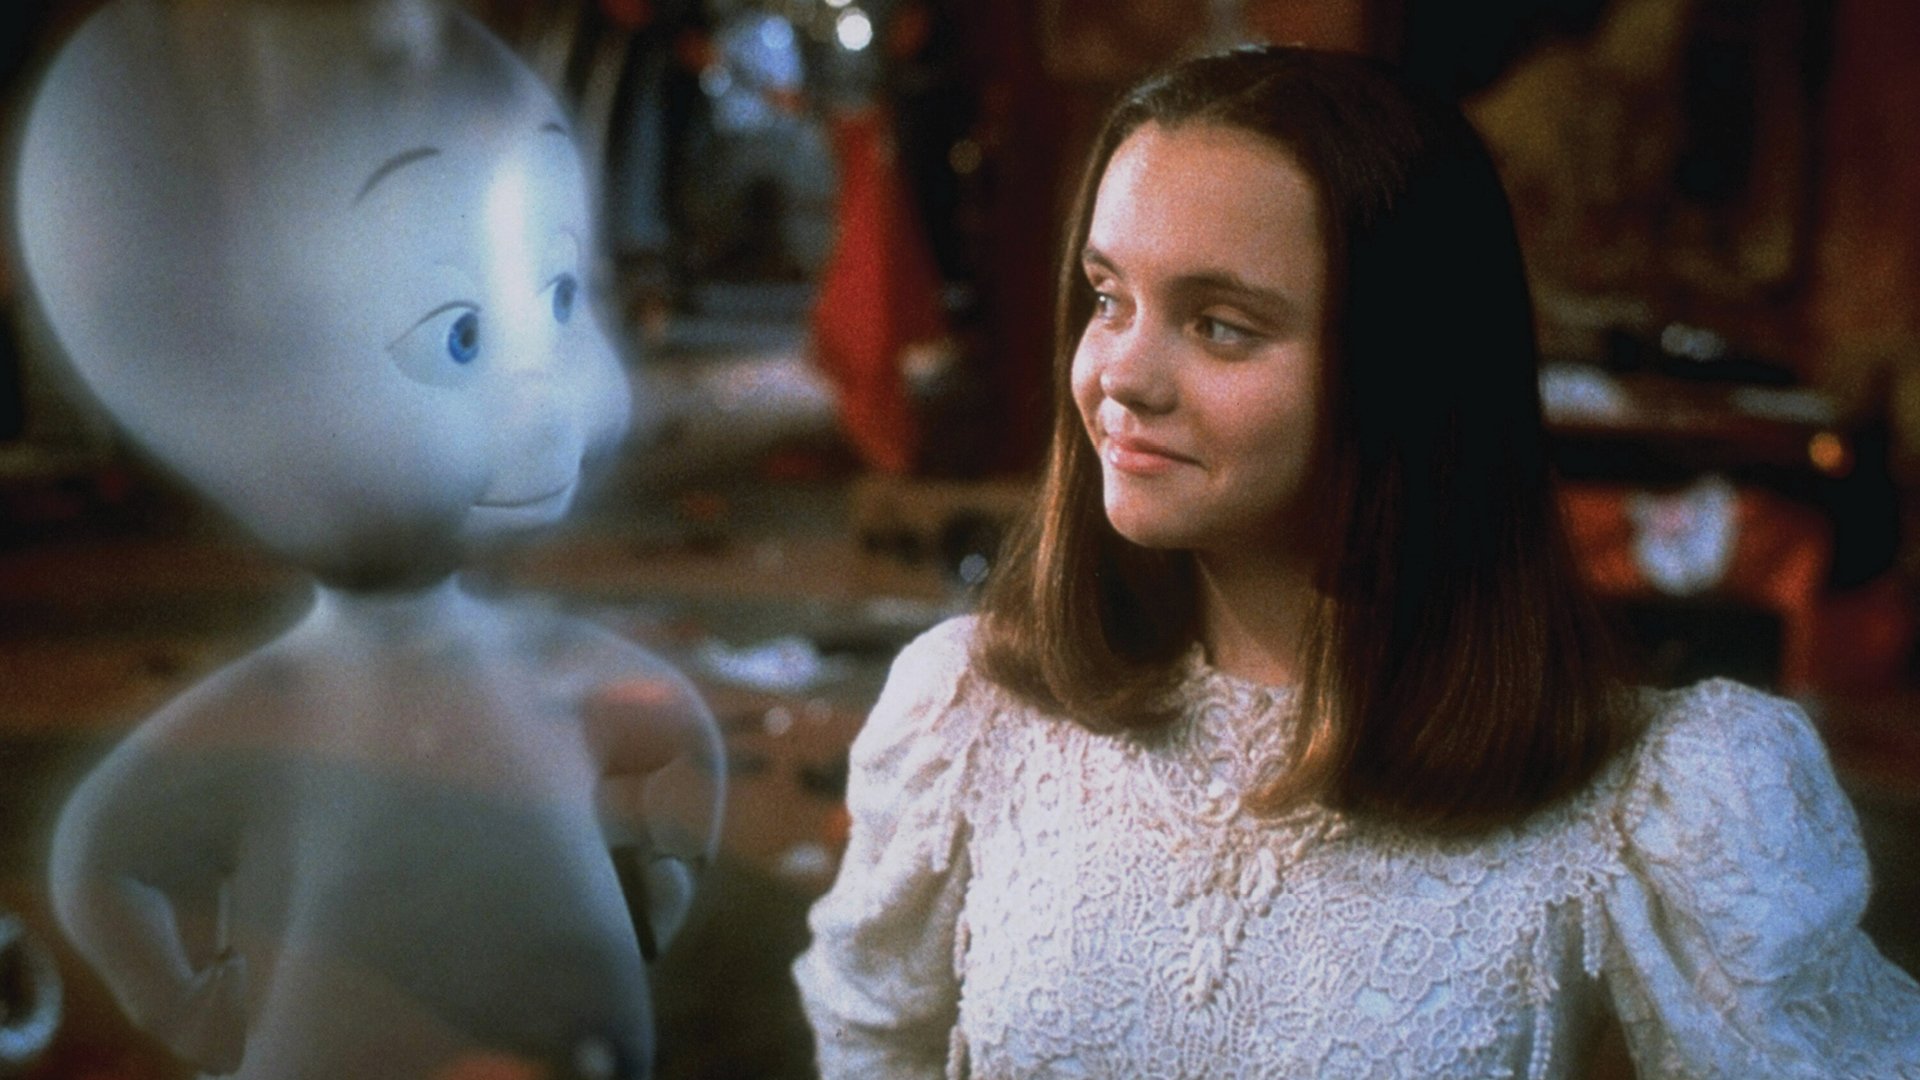 Hammer Museum 27—Family Flicks: Casper Get ready for #Halloween with our screening of Casper! When a young girl and her father try to rid their new mansion of its